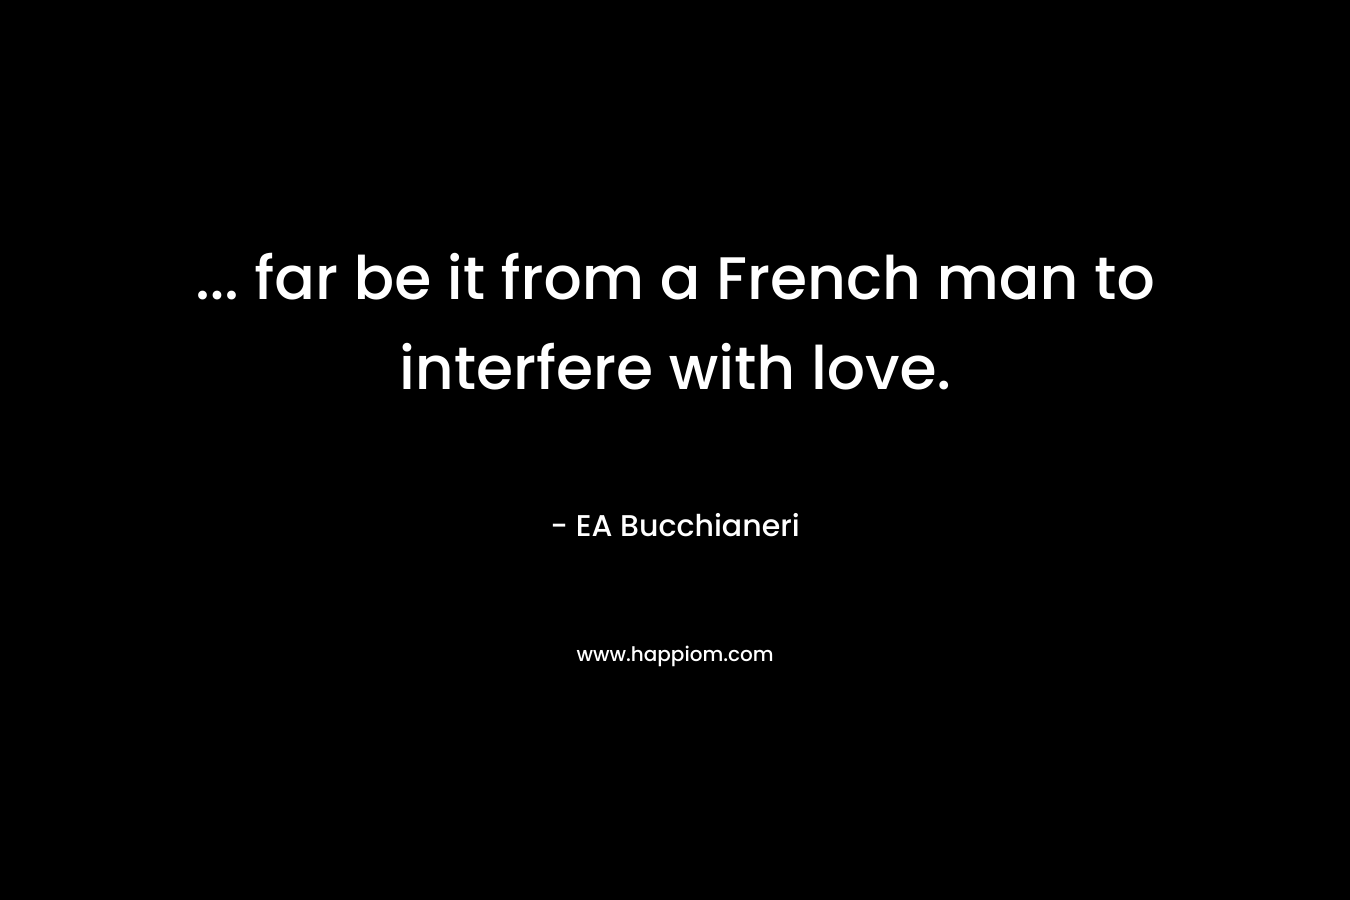 ... far be it from a French man to interfere with love.